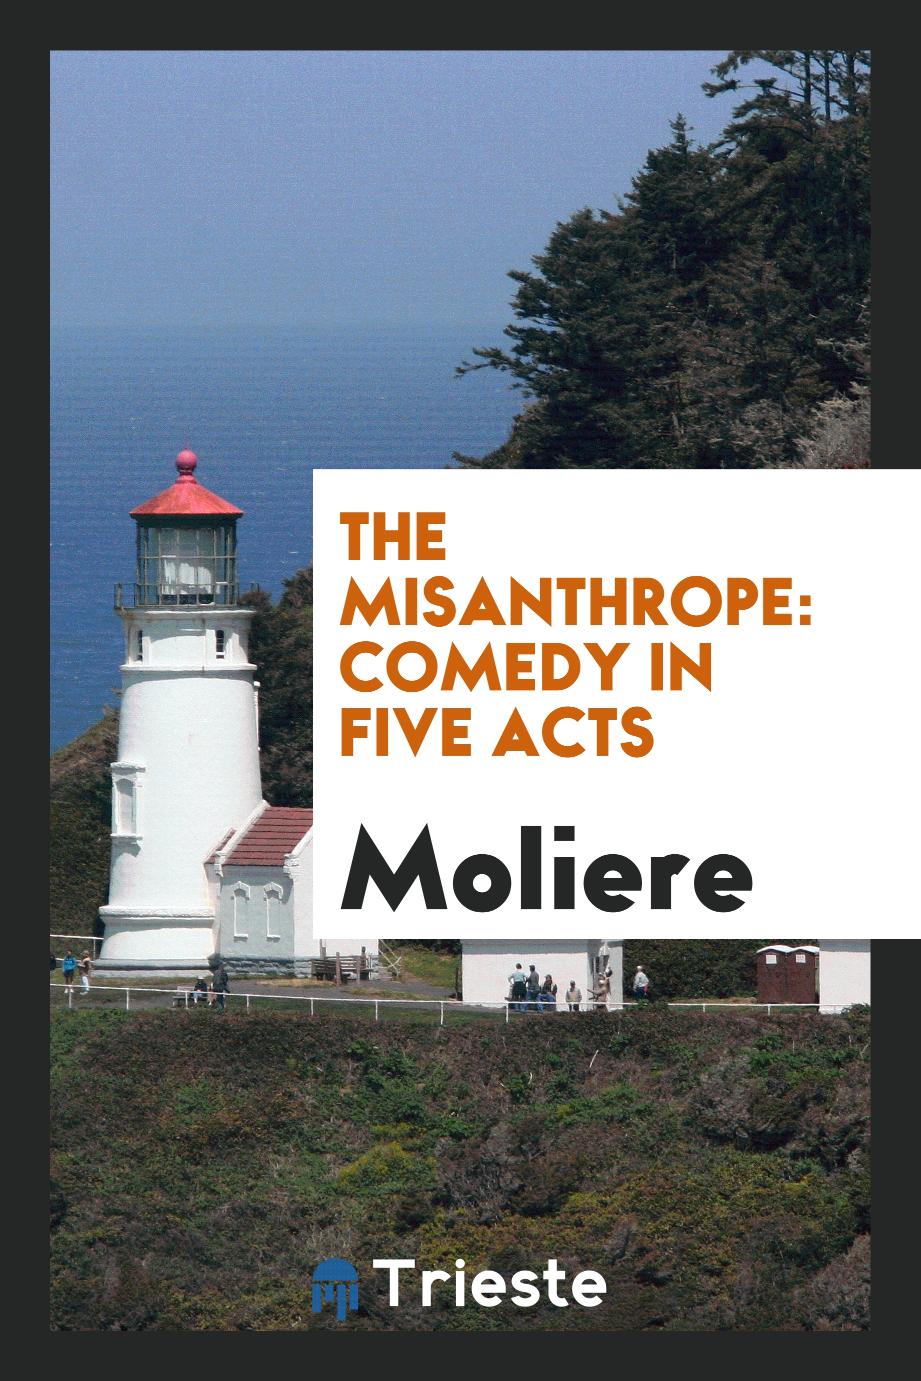 The misanthrope: comedy in five acts